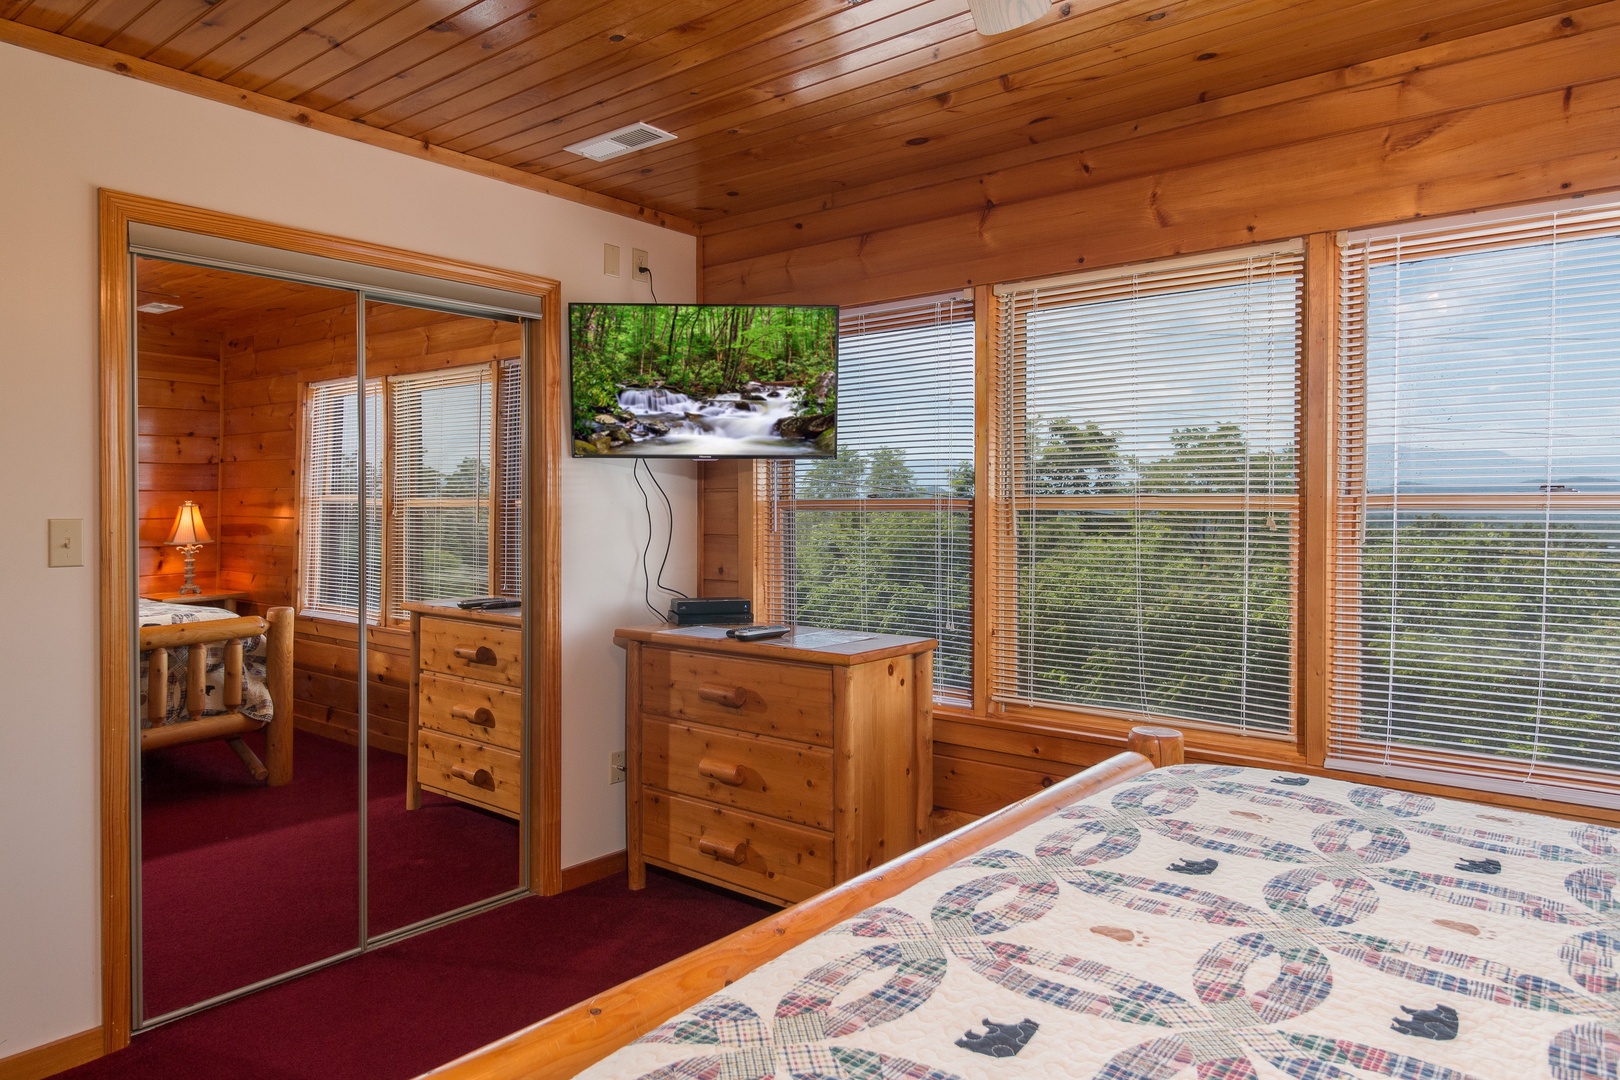 Dresser, TV, and closet in a bedroom at Moose Lodge, a 4 bedroom cabin rental located in Sevierville